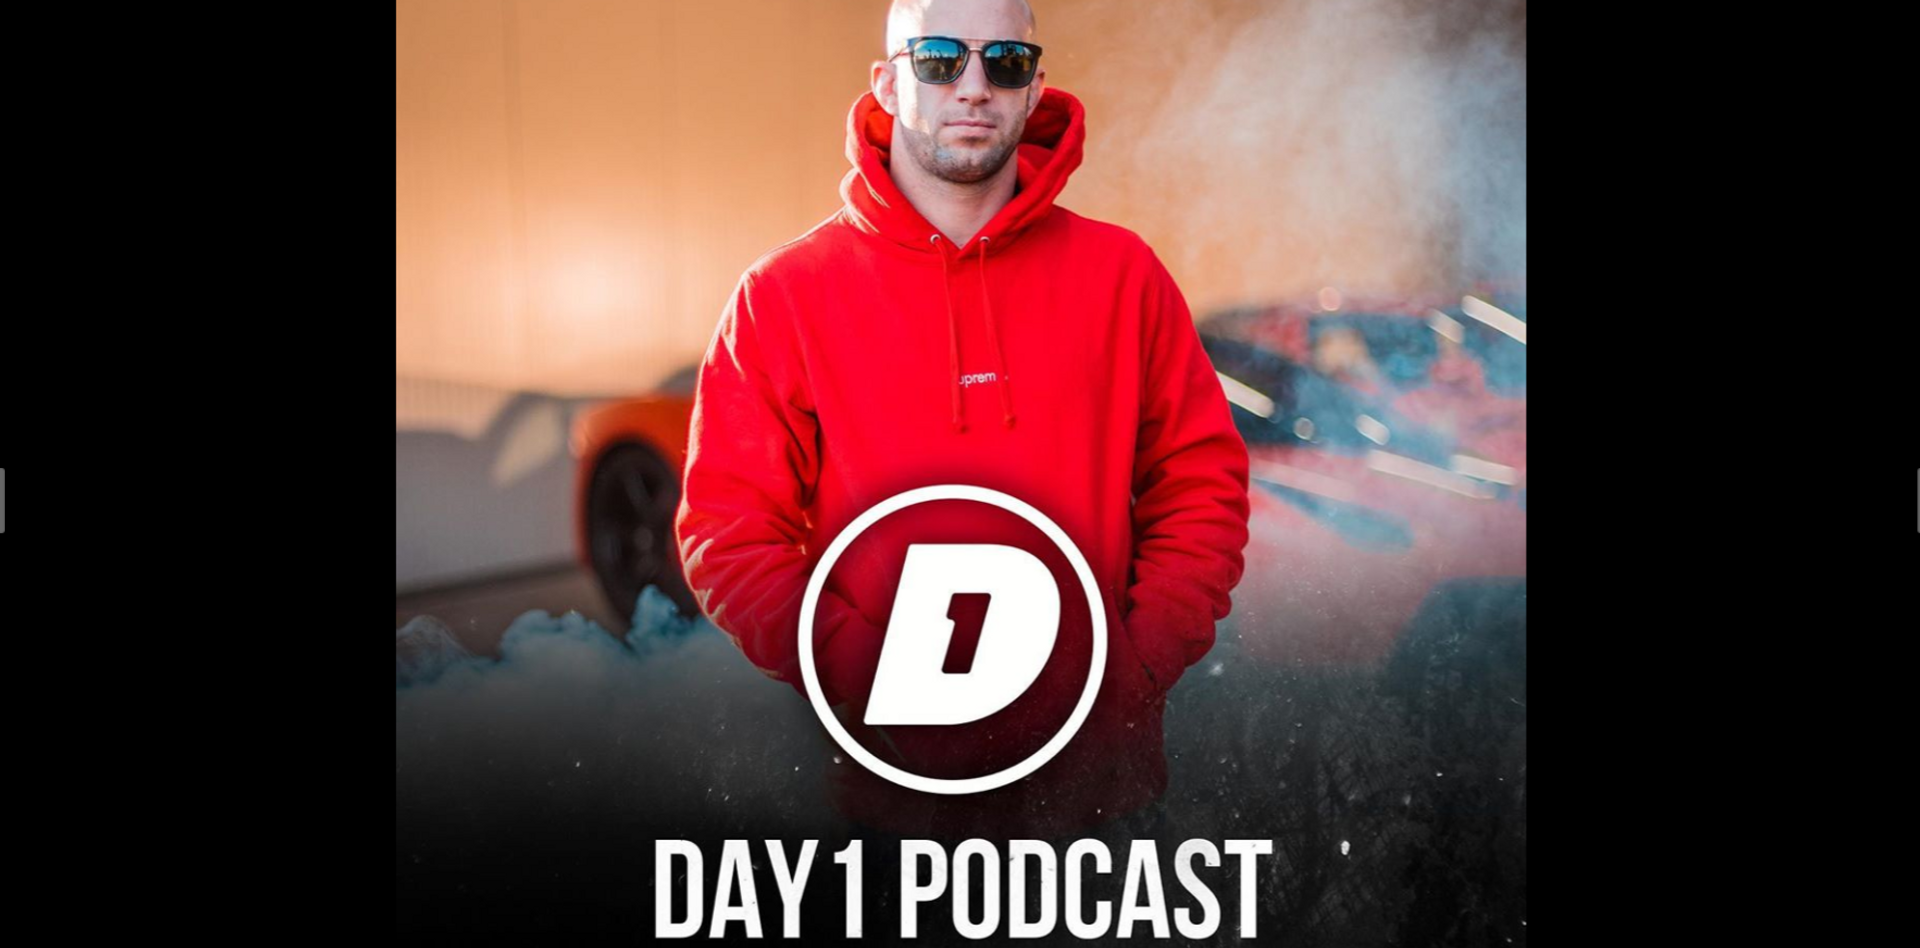 DAY1 podcast